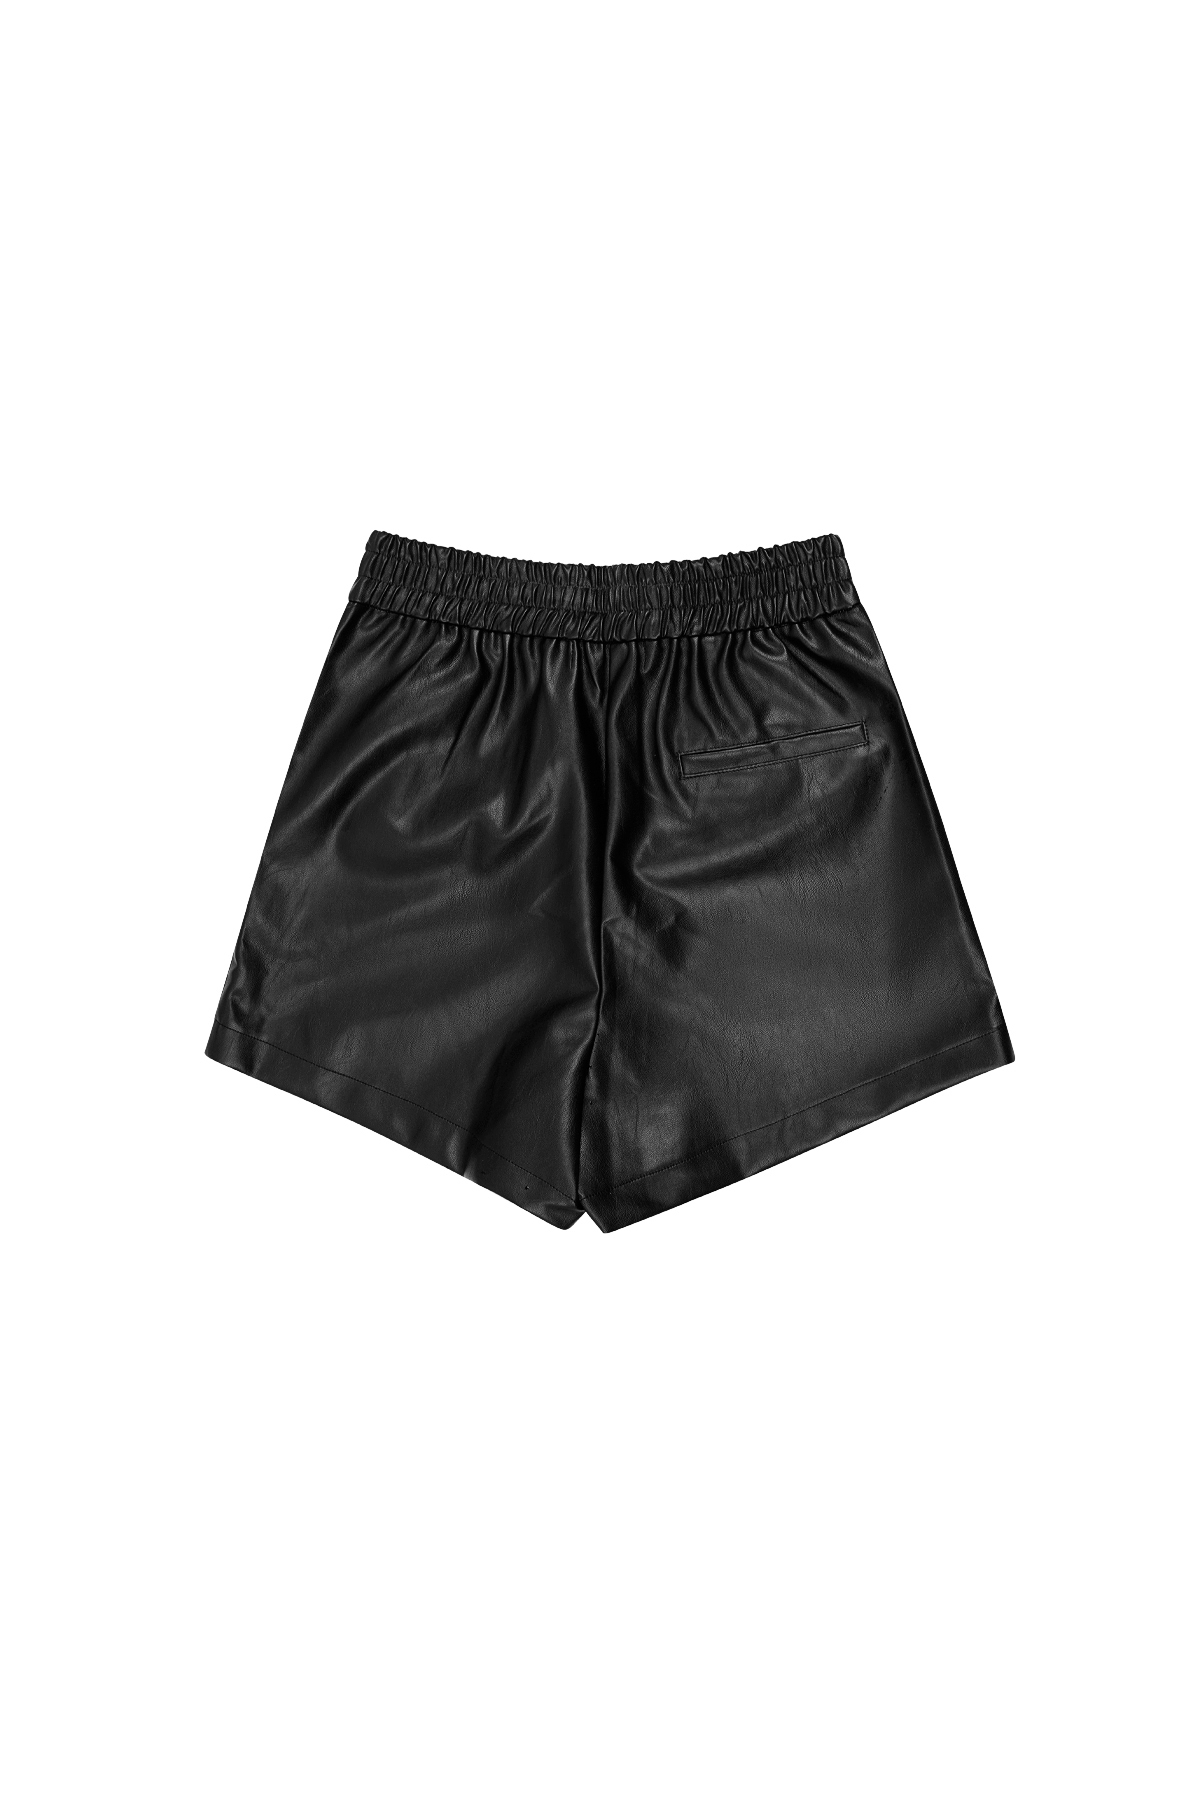 PU leather high waisted shorts - black h5 Picture6